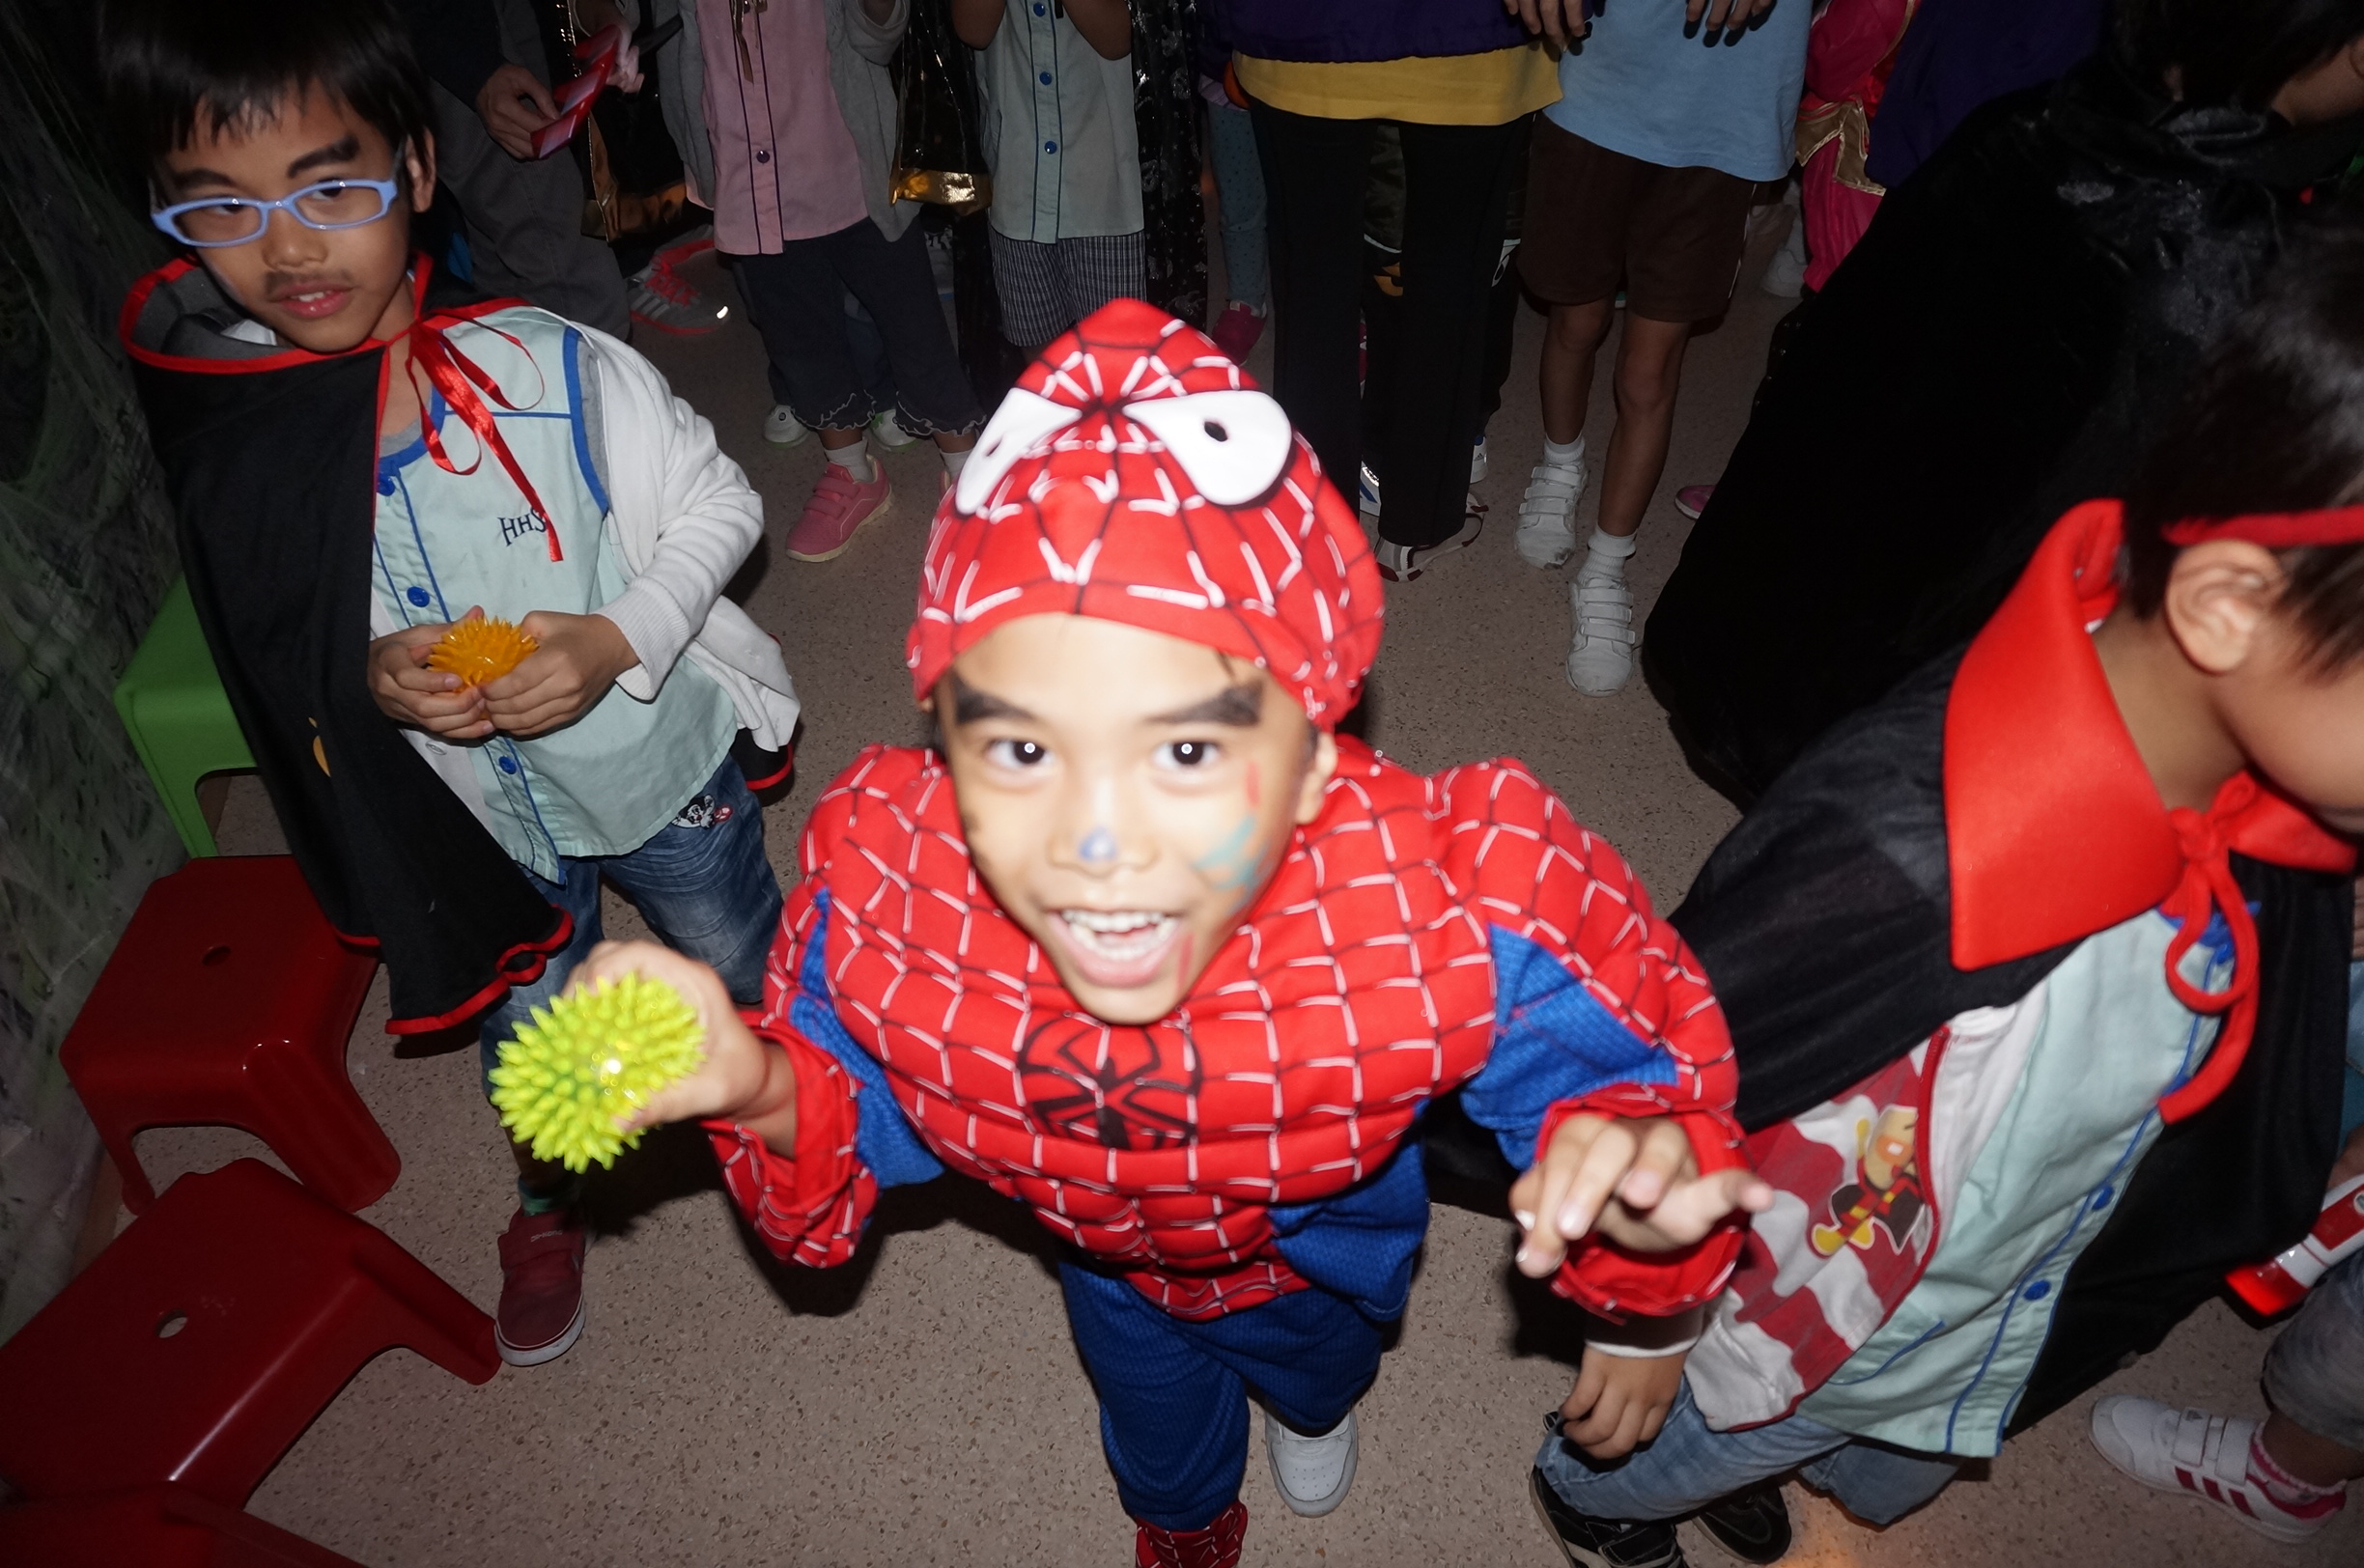 Dressed up in festive costume, children of Catherine Lo Centre celebrated Halloween with the volunteers from Rykadan Capital Limited.